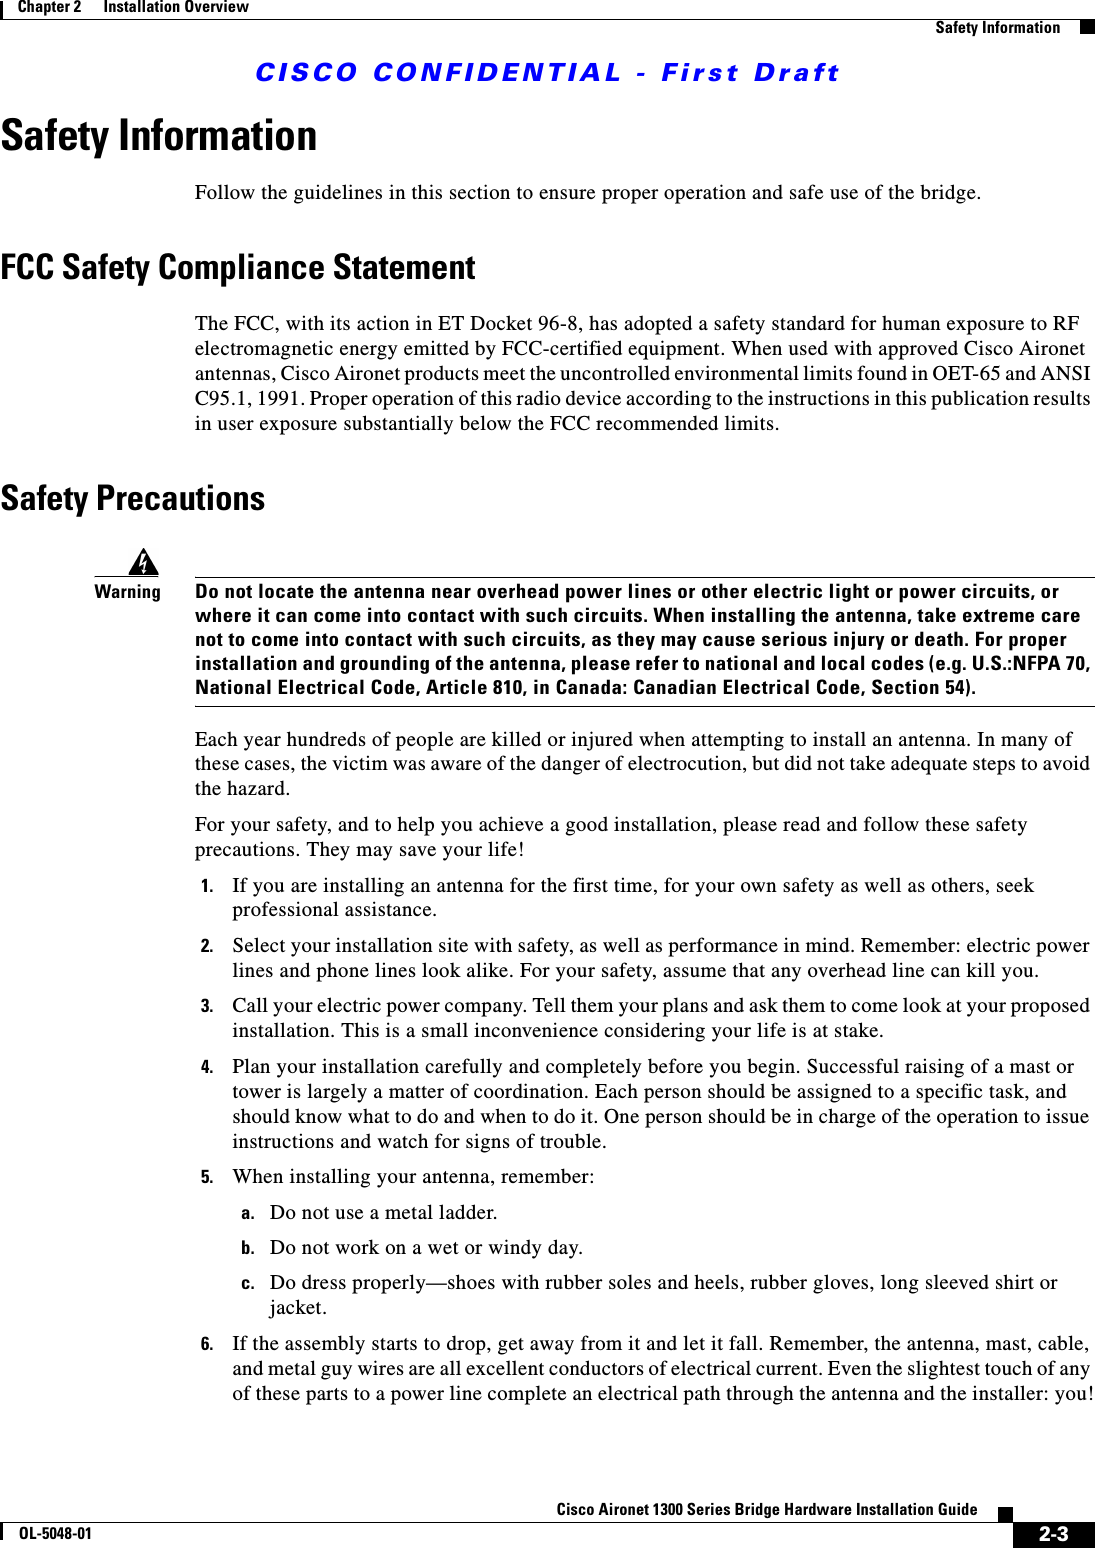 CISCO CONFIDENTIAL - First Draft2-3Cisco Aironet 1300 Series Bridge Hardware Installation GuideOL-5048-01Chapter 2      Installation OverviewSafety InformationSafety InformationFollow the guidelines in this section to ensure proper operation and safe use of the bridge.FCC Safety Compliance StatementThe FCC, with its action in ET Docket 96-8, has adopted a safety standard for human exposure to RF electromagnetic energy emitted by FCC-certified equipment. When used with approved Cisco Aironet antennas, Cisco Aironet products meet the uncontrolled environmental limits found in OET-65 and ANSI C95.1, 1991. Proper operation of this radio device according to the instructions in this publication results in user exposure substantially below the FCC recommended limits.Safety PrecautionsWarningDo not locate the antenna near overhead power lines or other electric light or power circuits, or where it can come into contact with such circuits. When installing the antenna, take extreme care not to come into contact with such circuits, as they may cause serious injury or death. For proper installation and grounding of the antenna, please refer to national and local codes (e.g. U.S.:NFPA 70, National Electrical Code, Article 810, in Canada: Canadian Electrical Code, Section 54).Each year hundreds of people are killed or injured when attempting to install an antenna. In many of these cases, the victim was aware of the danger of electrocution, but did not take adequate steps to avoid the hazard.For your safety, and to help you achieve a good installation, please read and follow these safety precautions. They may save your life!1. If you are installing an antenna for the first time, for your own safety as well as others, seek professional assistance. 2. Select your installation site with safety, as well as performance in mind. Remember: electric power lines and phone lines look alike. For your safety, assume that any overhead line can kill you.3. Call your electric power company. Tell them your plans and ask them to come look at your proposed installation. This is a small inconvenience considering your life is at stake.4. Plan your installation carefully and completely before you begin. Successful raising of a mast or tower is largely a matter of coordination. Each person should be assigned to a specific task, and should know what to do and when to do it. One person should be in charge of the operation to issue instructions and watch for signs of trouble.5. When installing your antenna, remember:a. Do not use a metal ladder.b. Do not work on a wet or windy day.c. Do dress properly—shoes with rubber soles and heels, rubber gloves, long sleeved shirt or jacket.6. If the assembly starts to drop, get away from it and let it fall. Remember, the antenna, mast, cable, and metal guy wires are all excellent conductors of electrical current. Even the slightest touch of any of these parts to a power line complete an electrical path through the antenna and the installer: you!